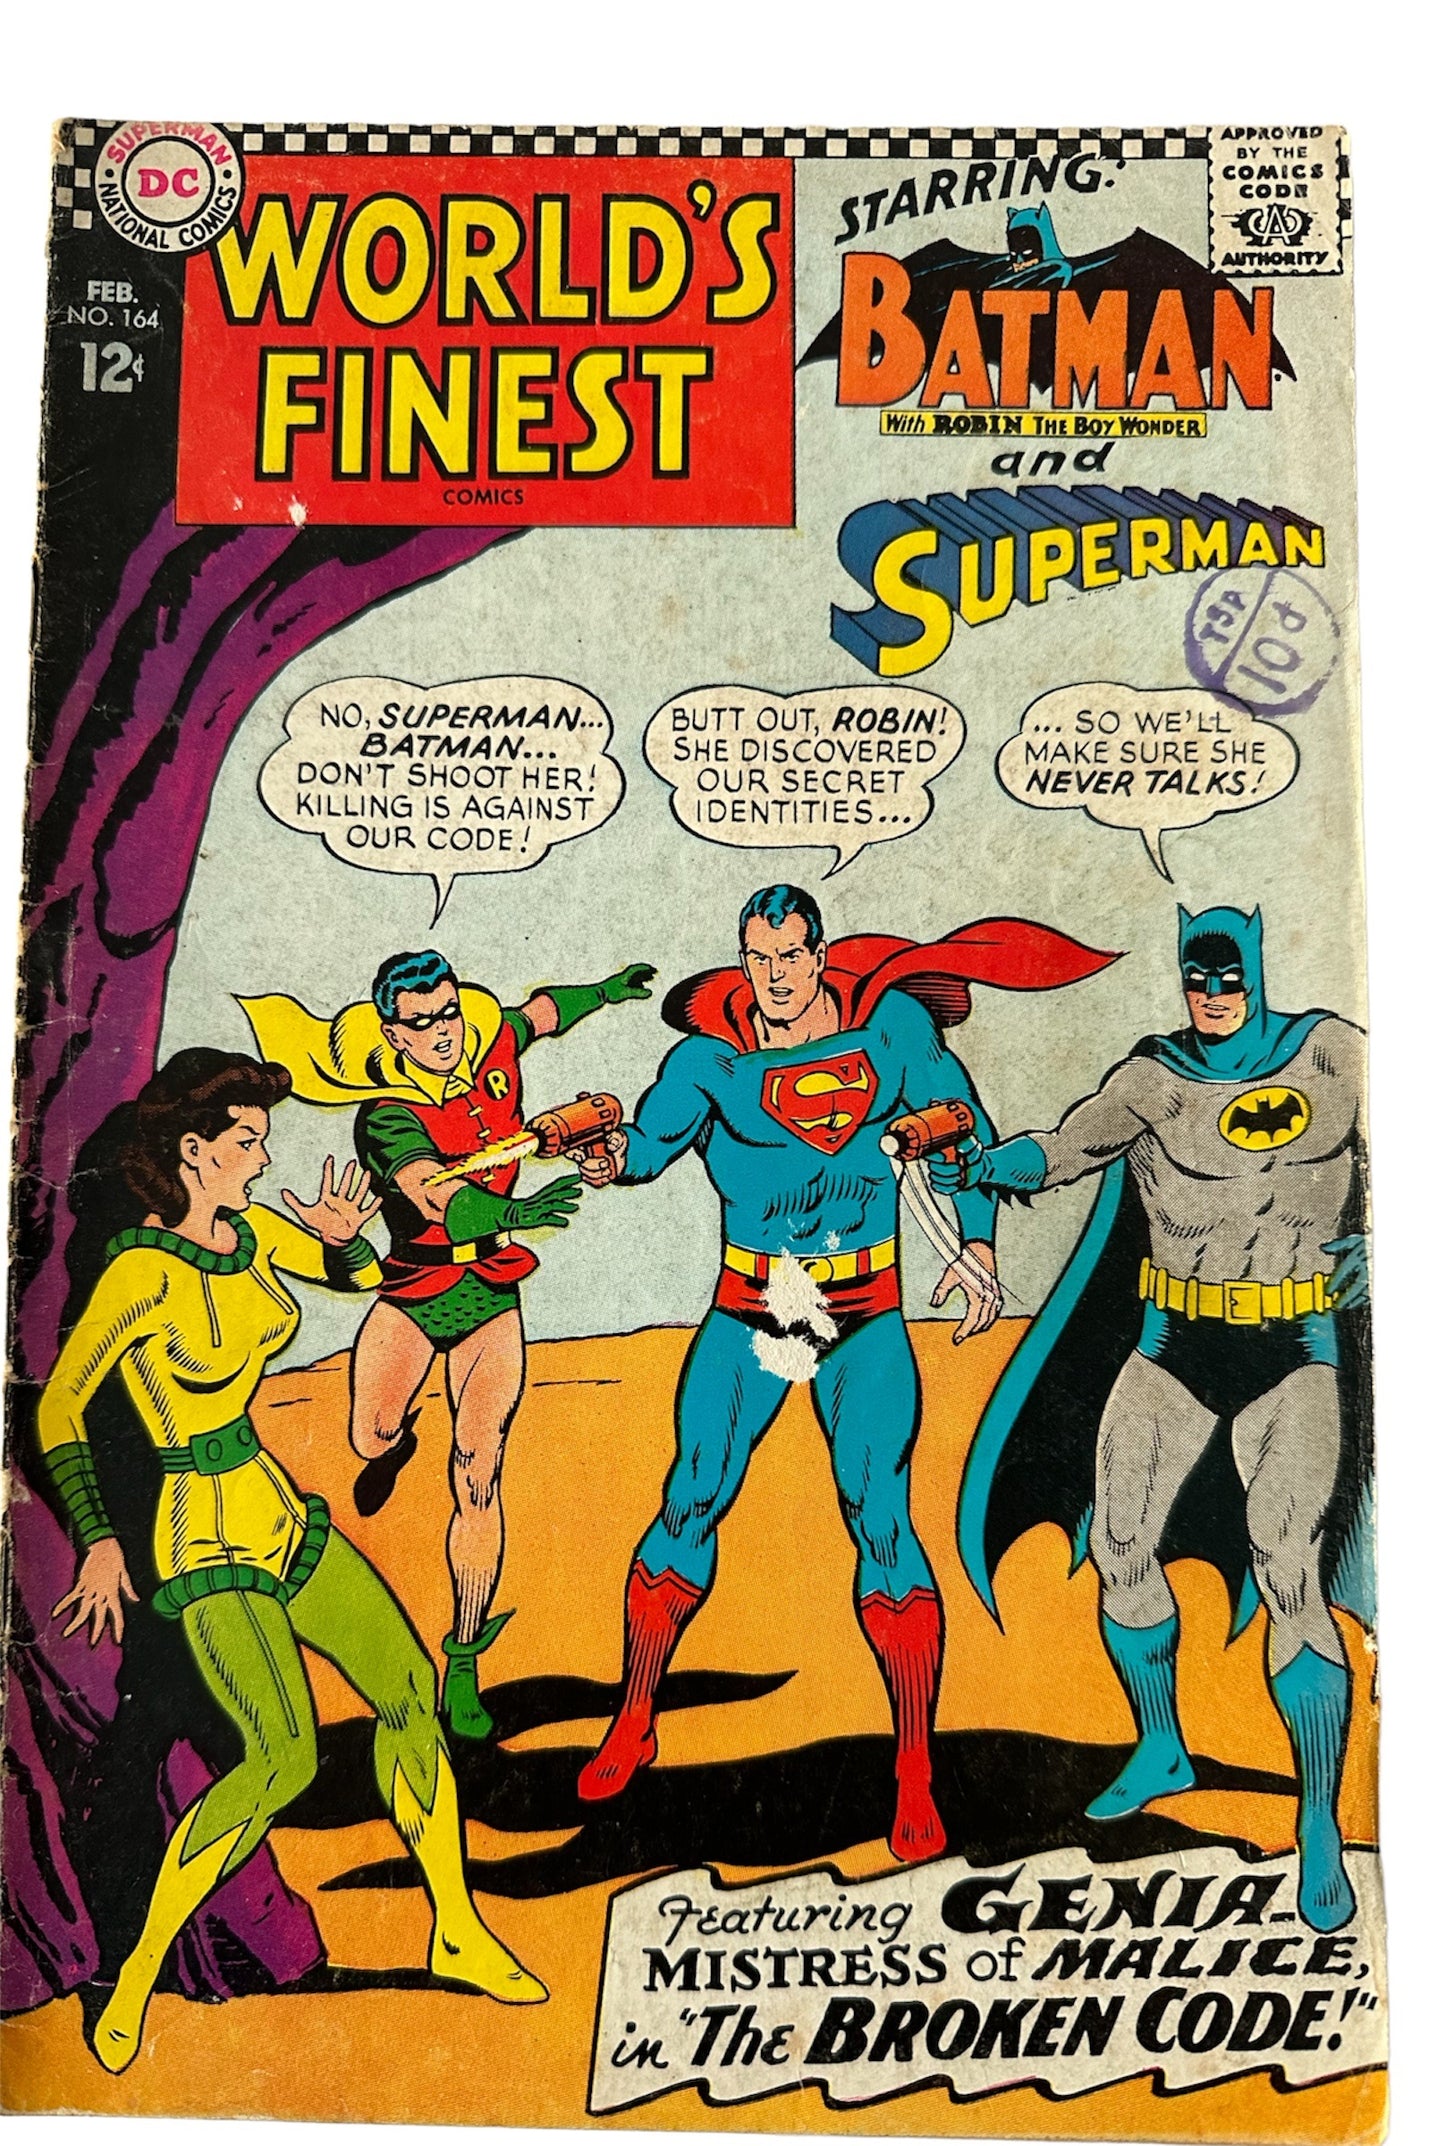 Vintage 1967 DC Worlds Finest Comics Issue Number 164 - Starring SuperMan And BatMan & Robin In The Broken Code - Good Condition Vintage Comic